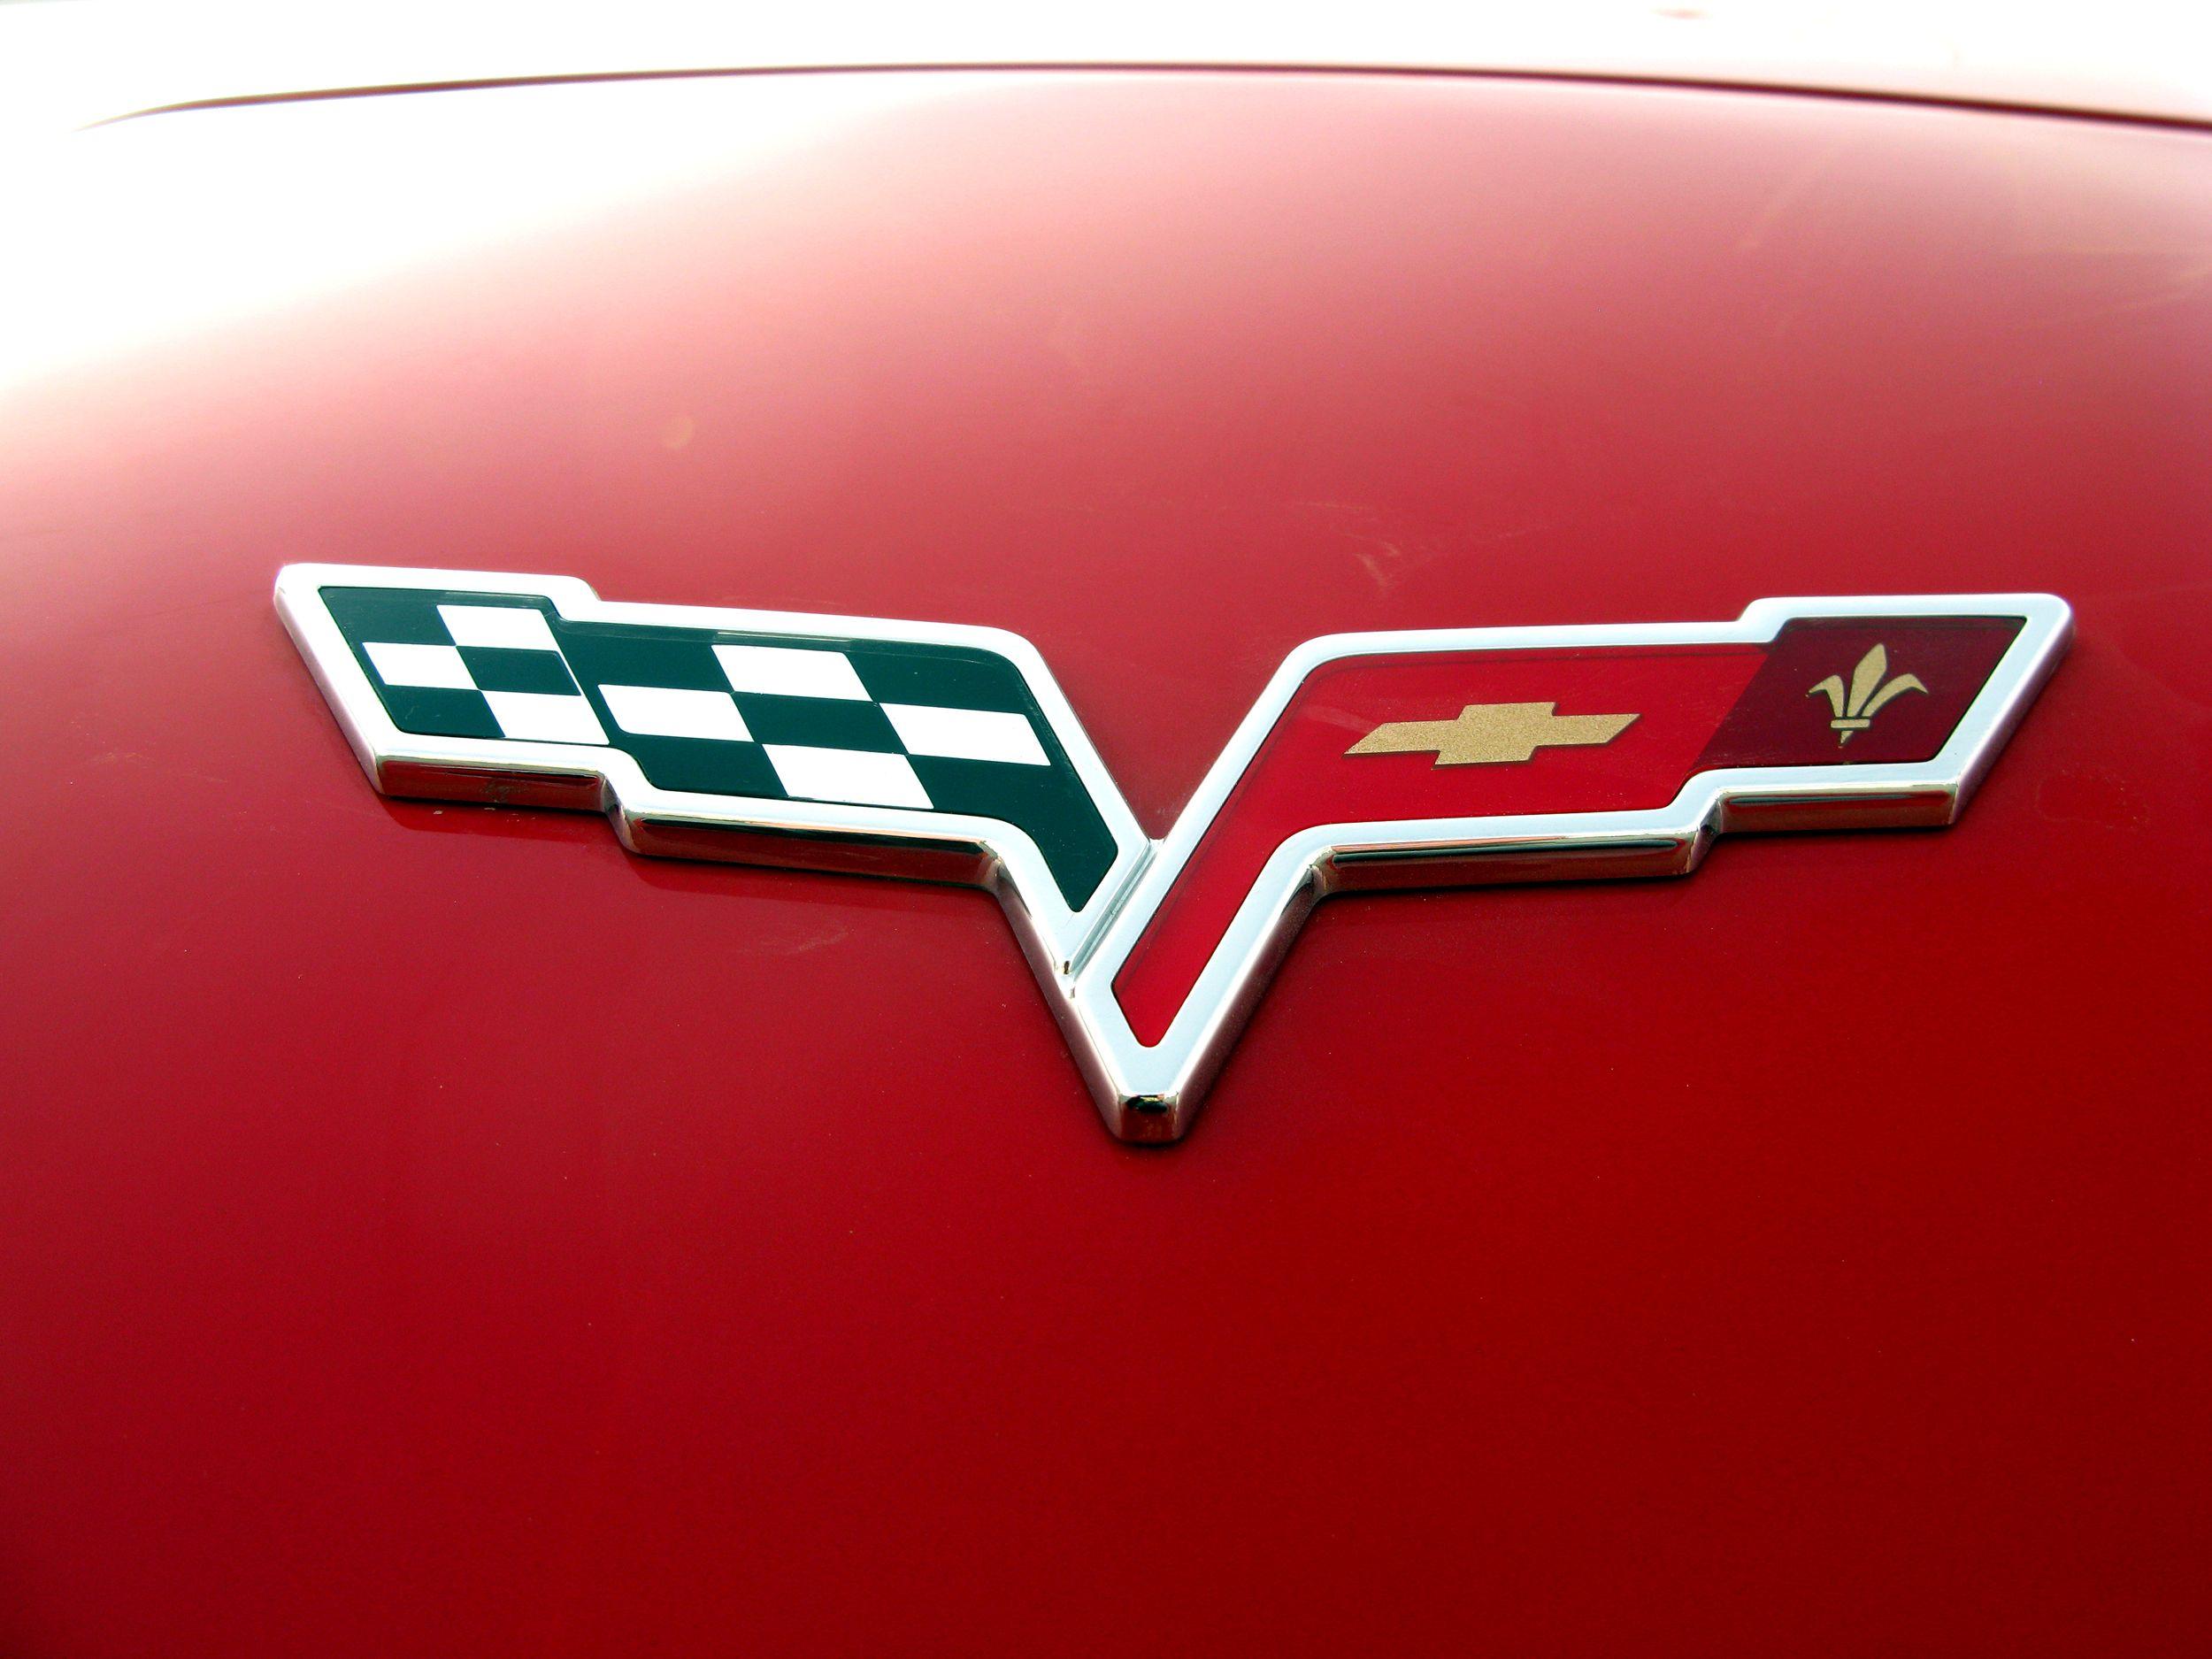 Red Vehicle Logo - Chevy Logo, Chevrolet Car Symbol Meaning and History | Car Brand ...